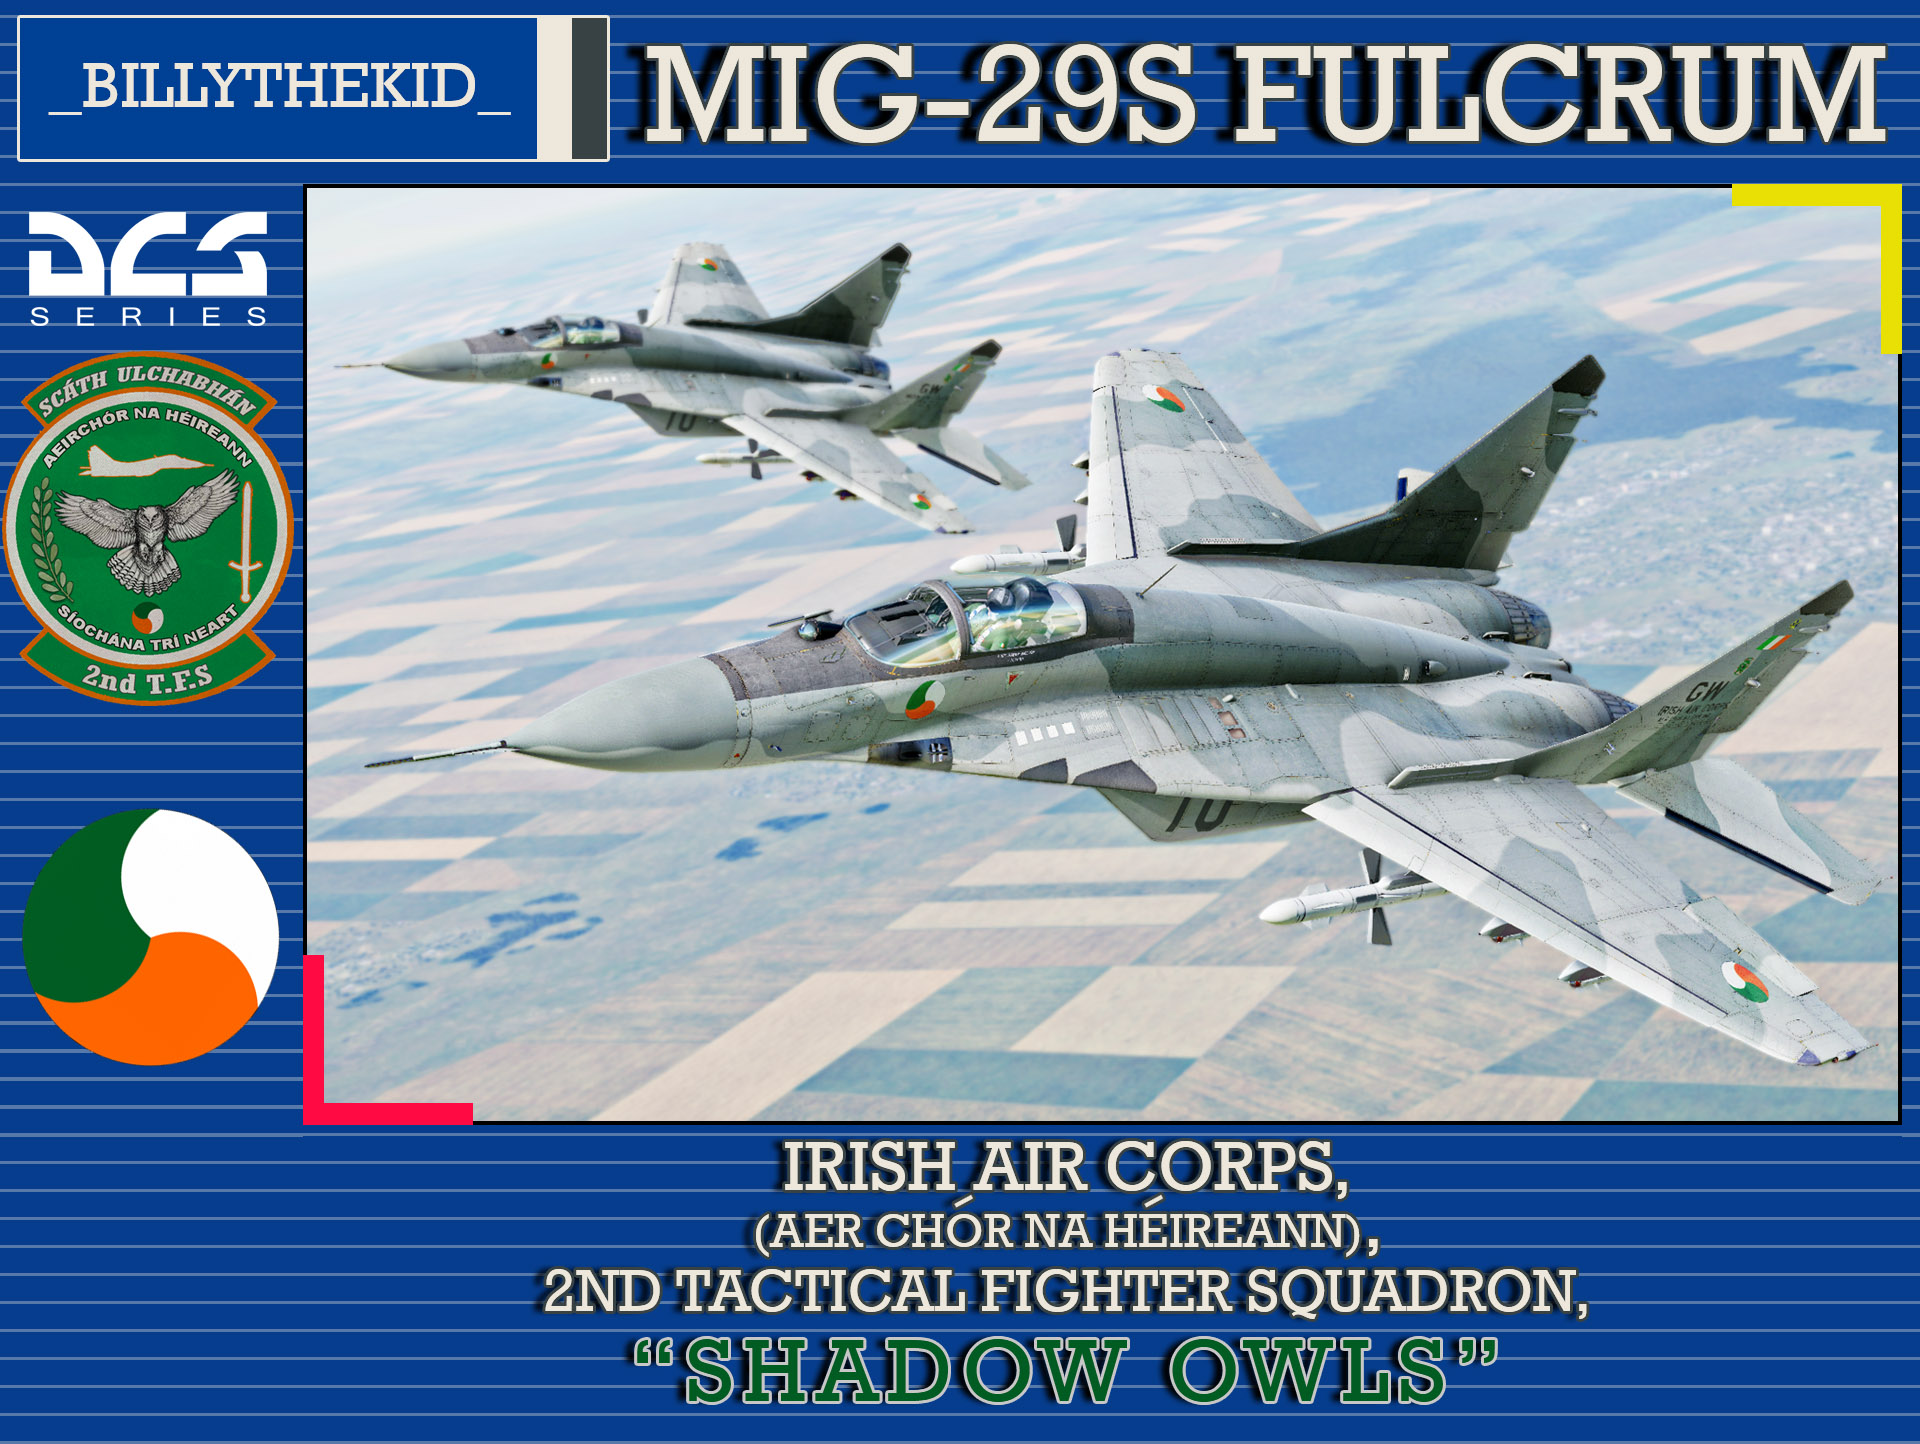 Irish Air Corps 2nd Tactical Fighter Squadron "Shadow Owls" MiG-29S Fulcrum